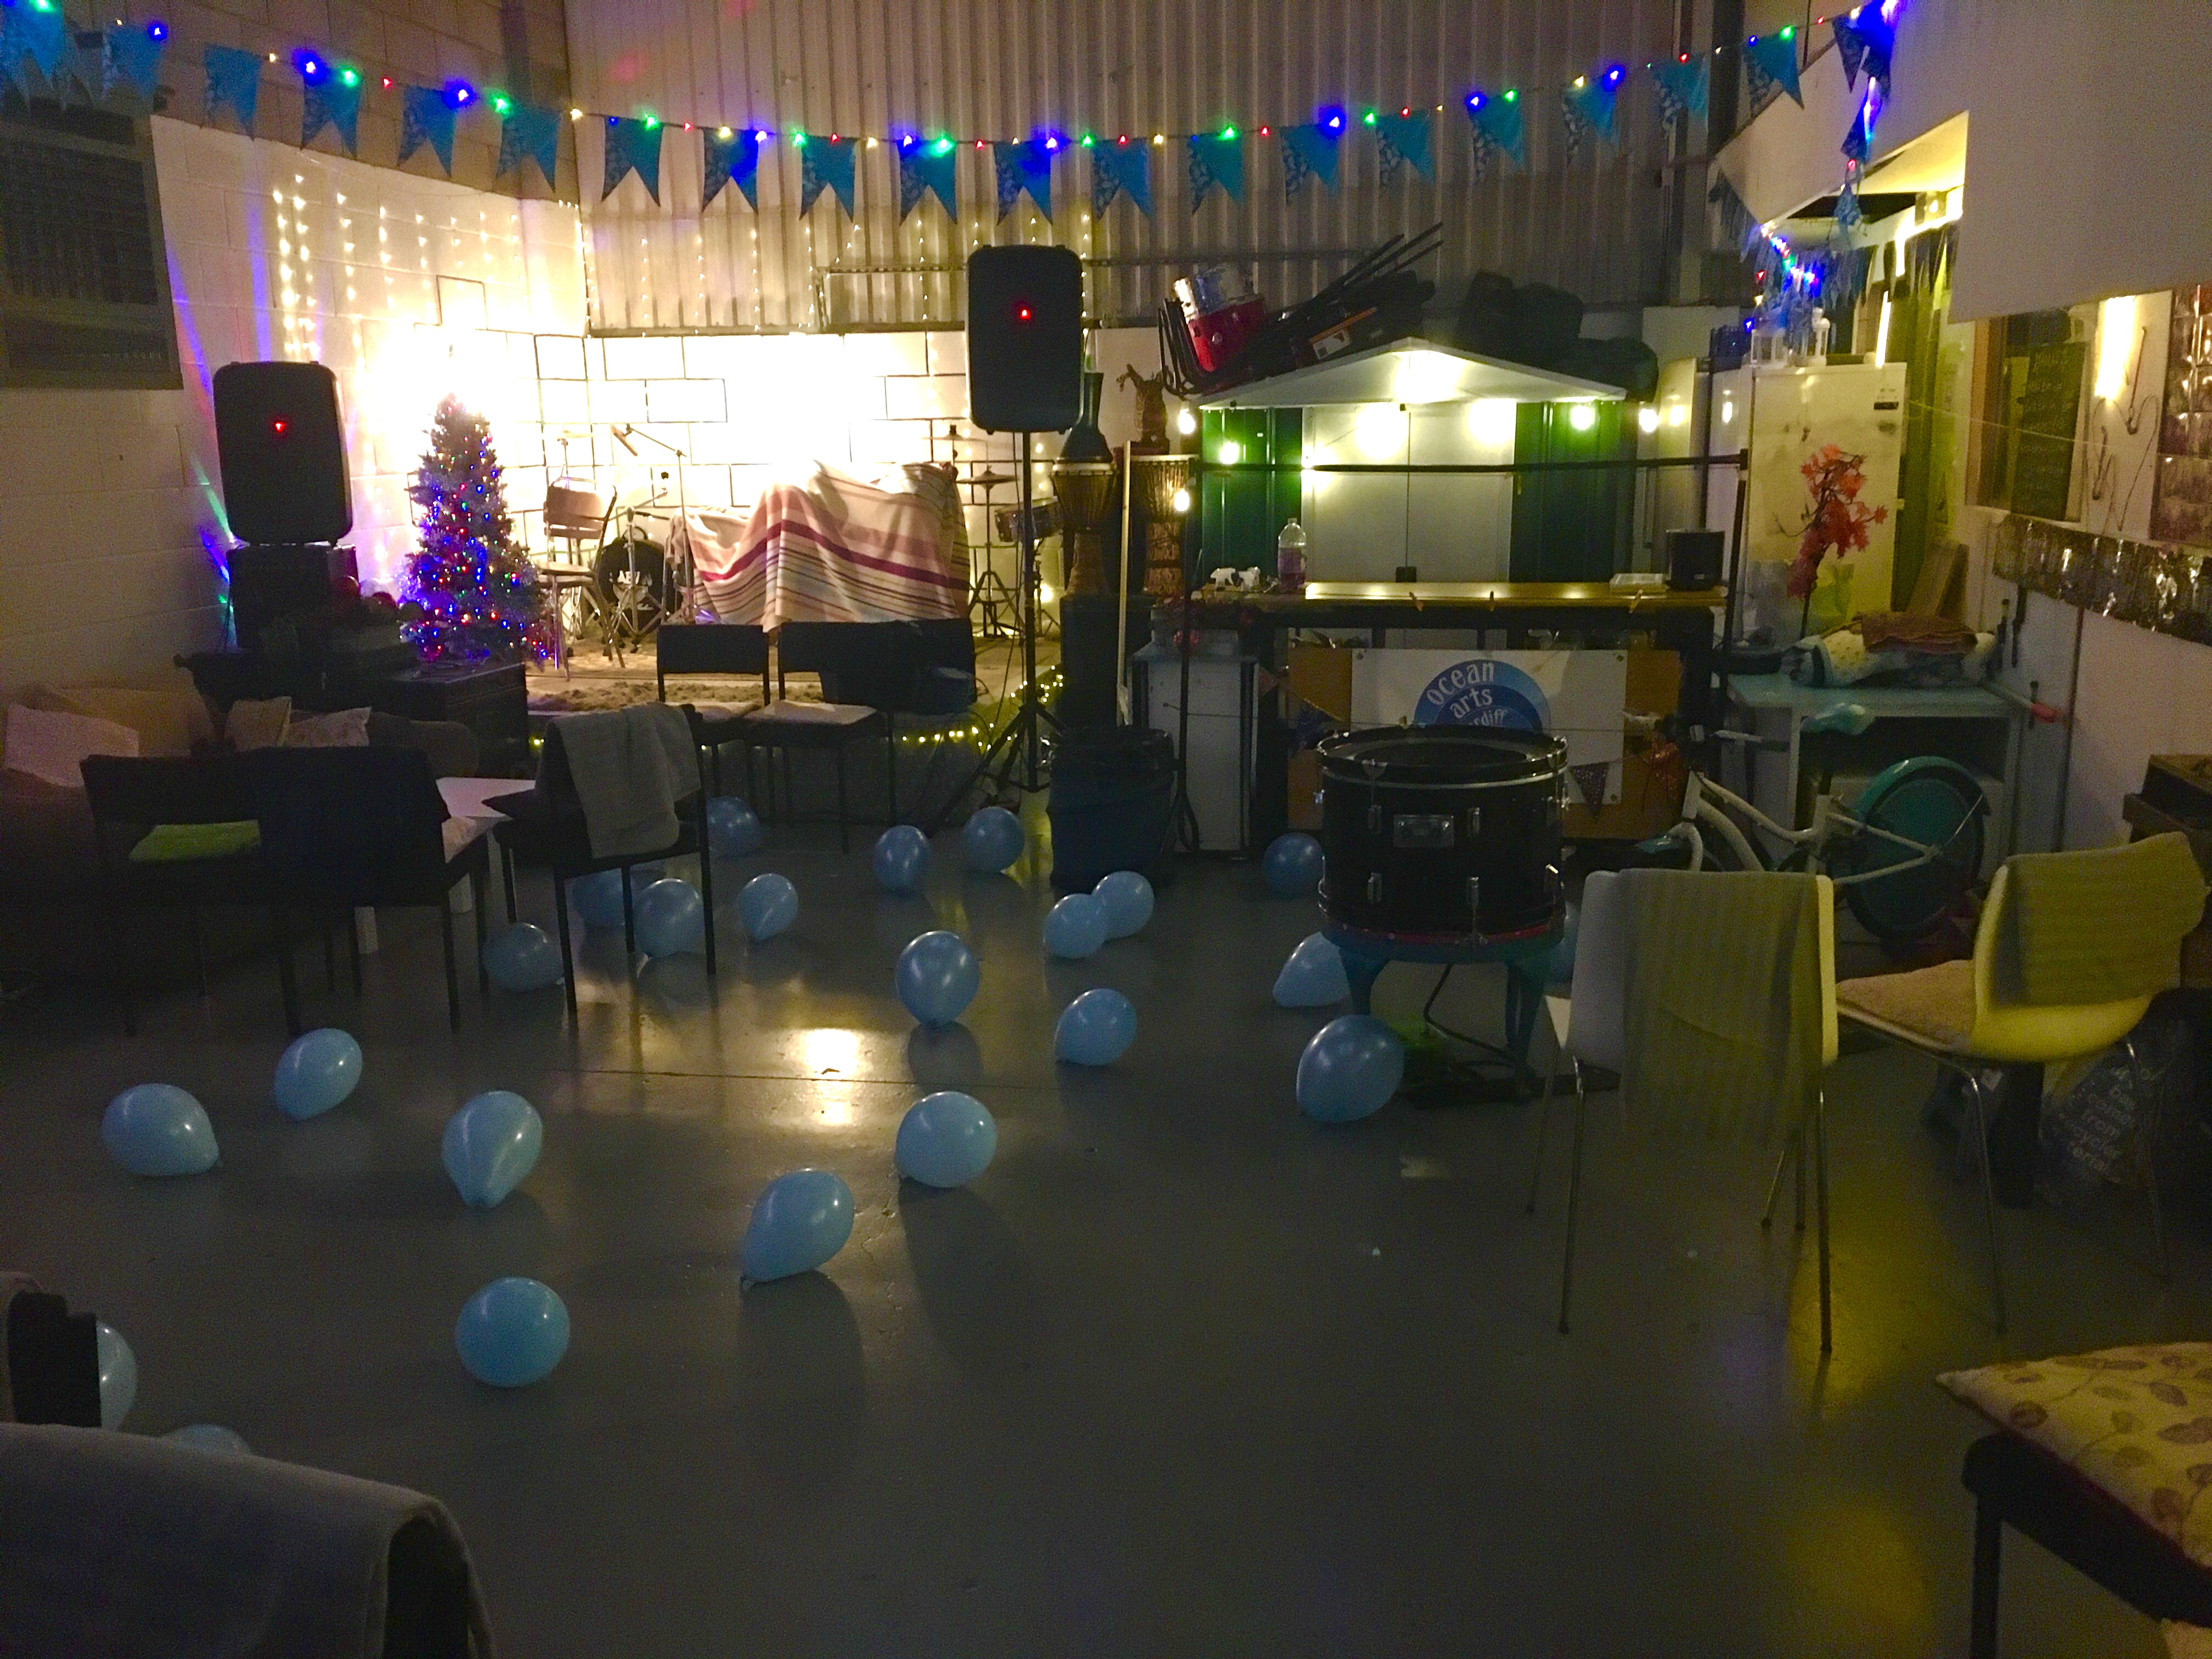 This is the main space in Ocean Arts Cardiff set up for a birthday party.  There is a small stage, sound system, lots of fairy lights and blue balloons on the floor.  